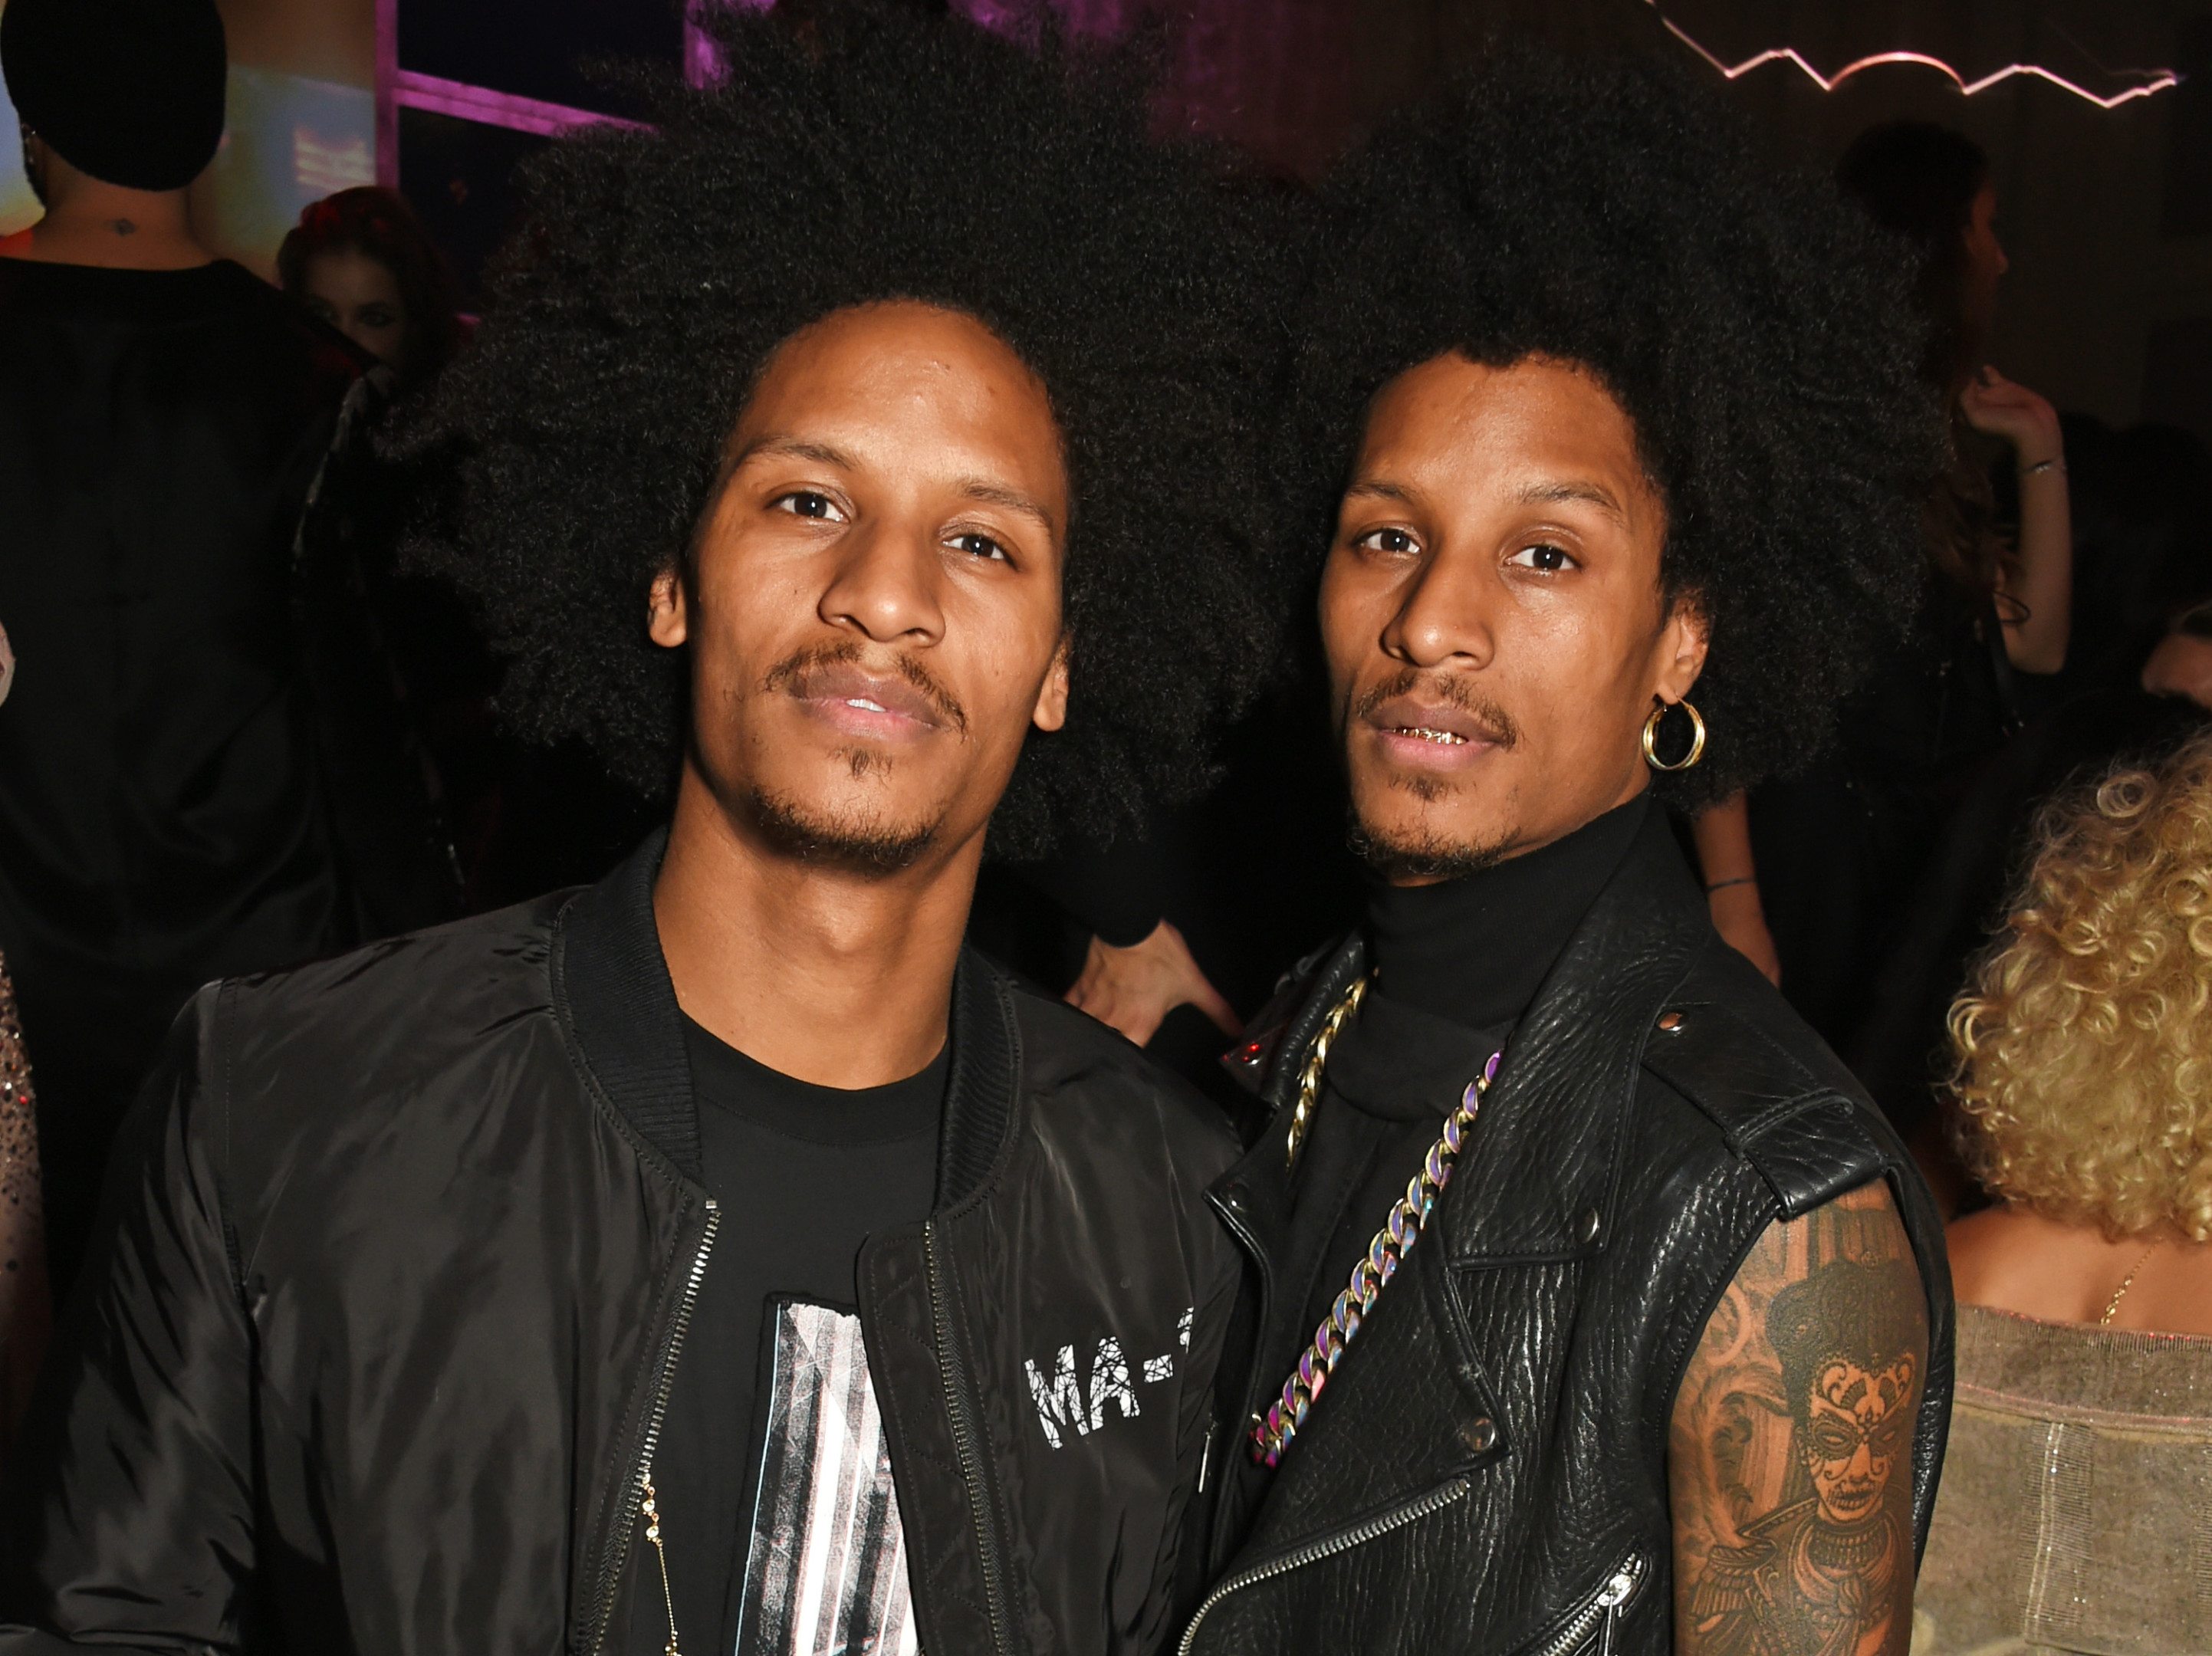 Les Twins 5 Things You Need to Know About the 'World of Dance' Winners